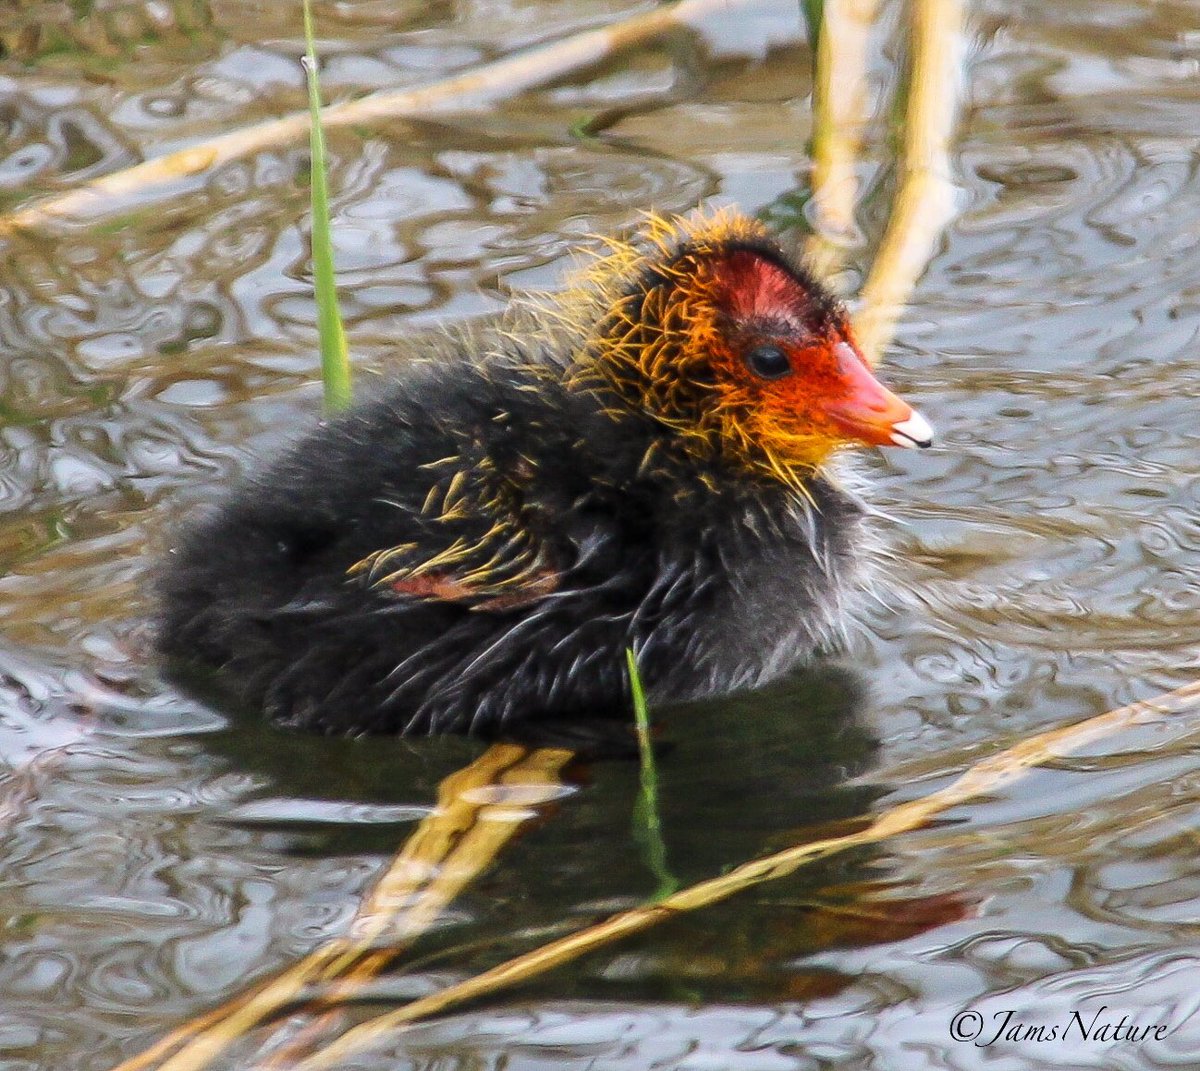 Coot chick having a moment. Nice to see Mother Coot with her four chicks, happily showing them off. Photo taken from the footpath next to local lake.